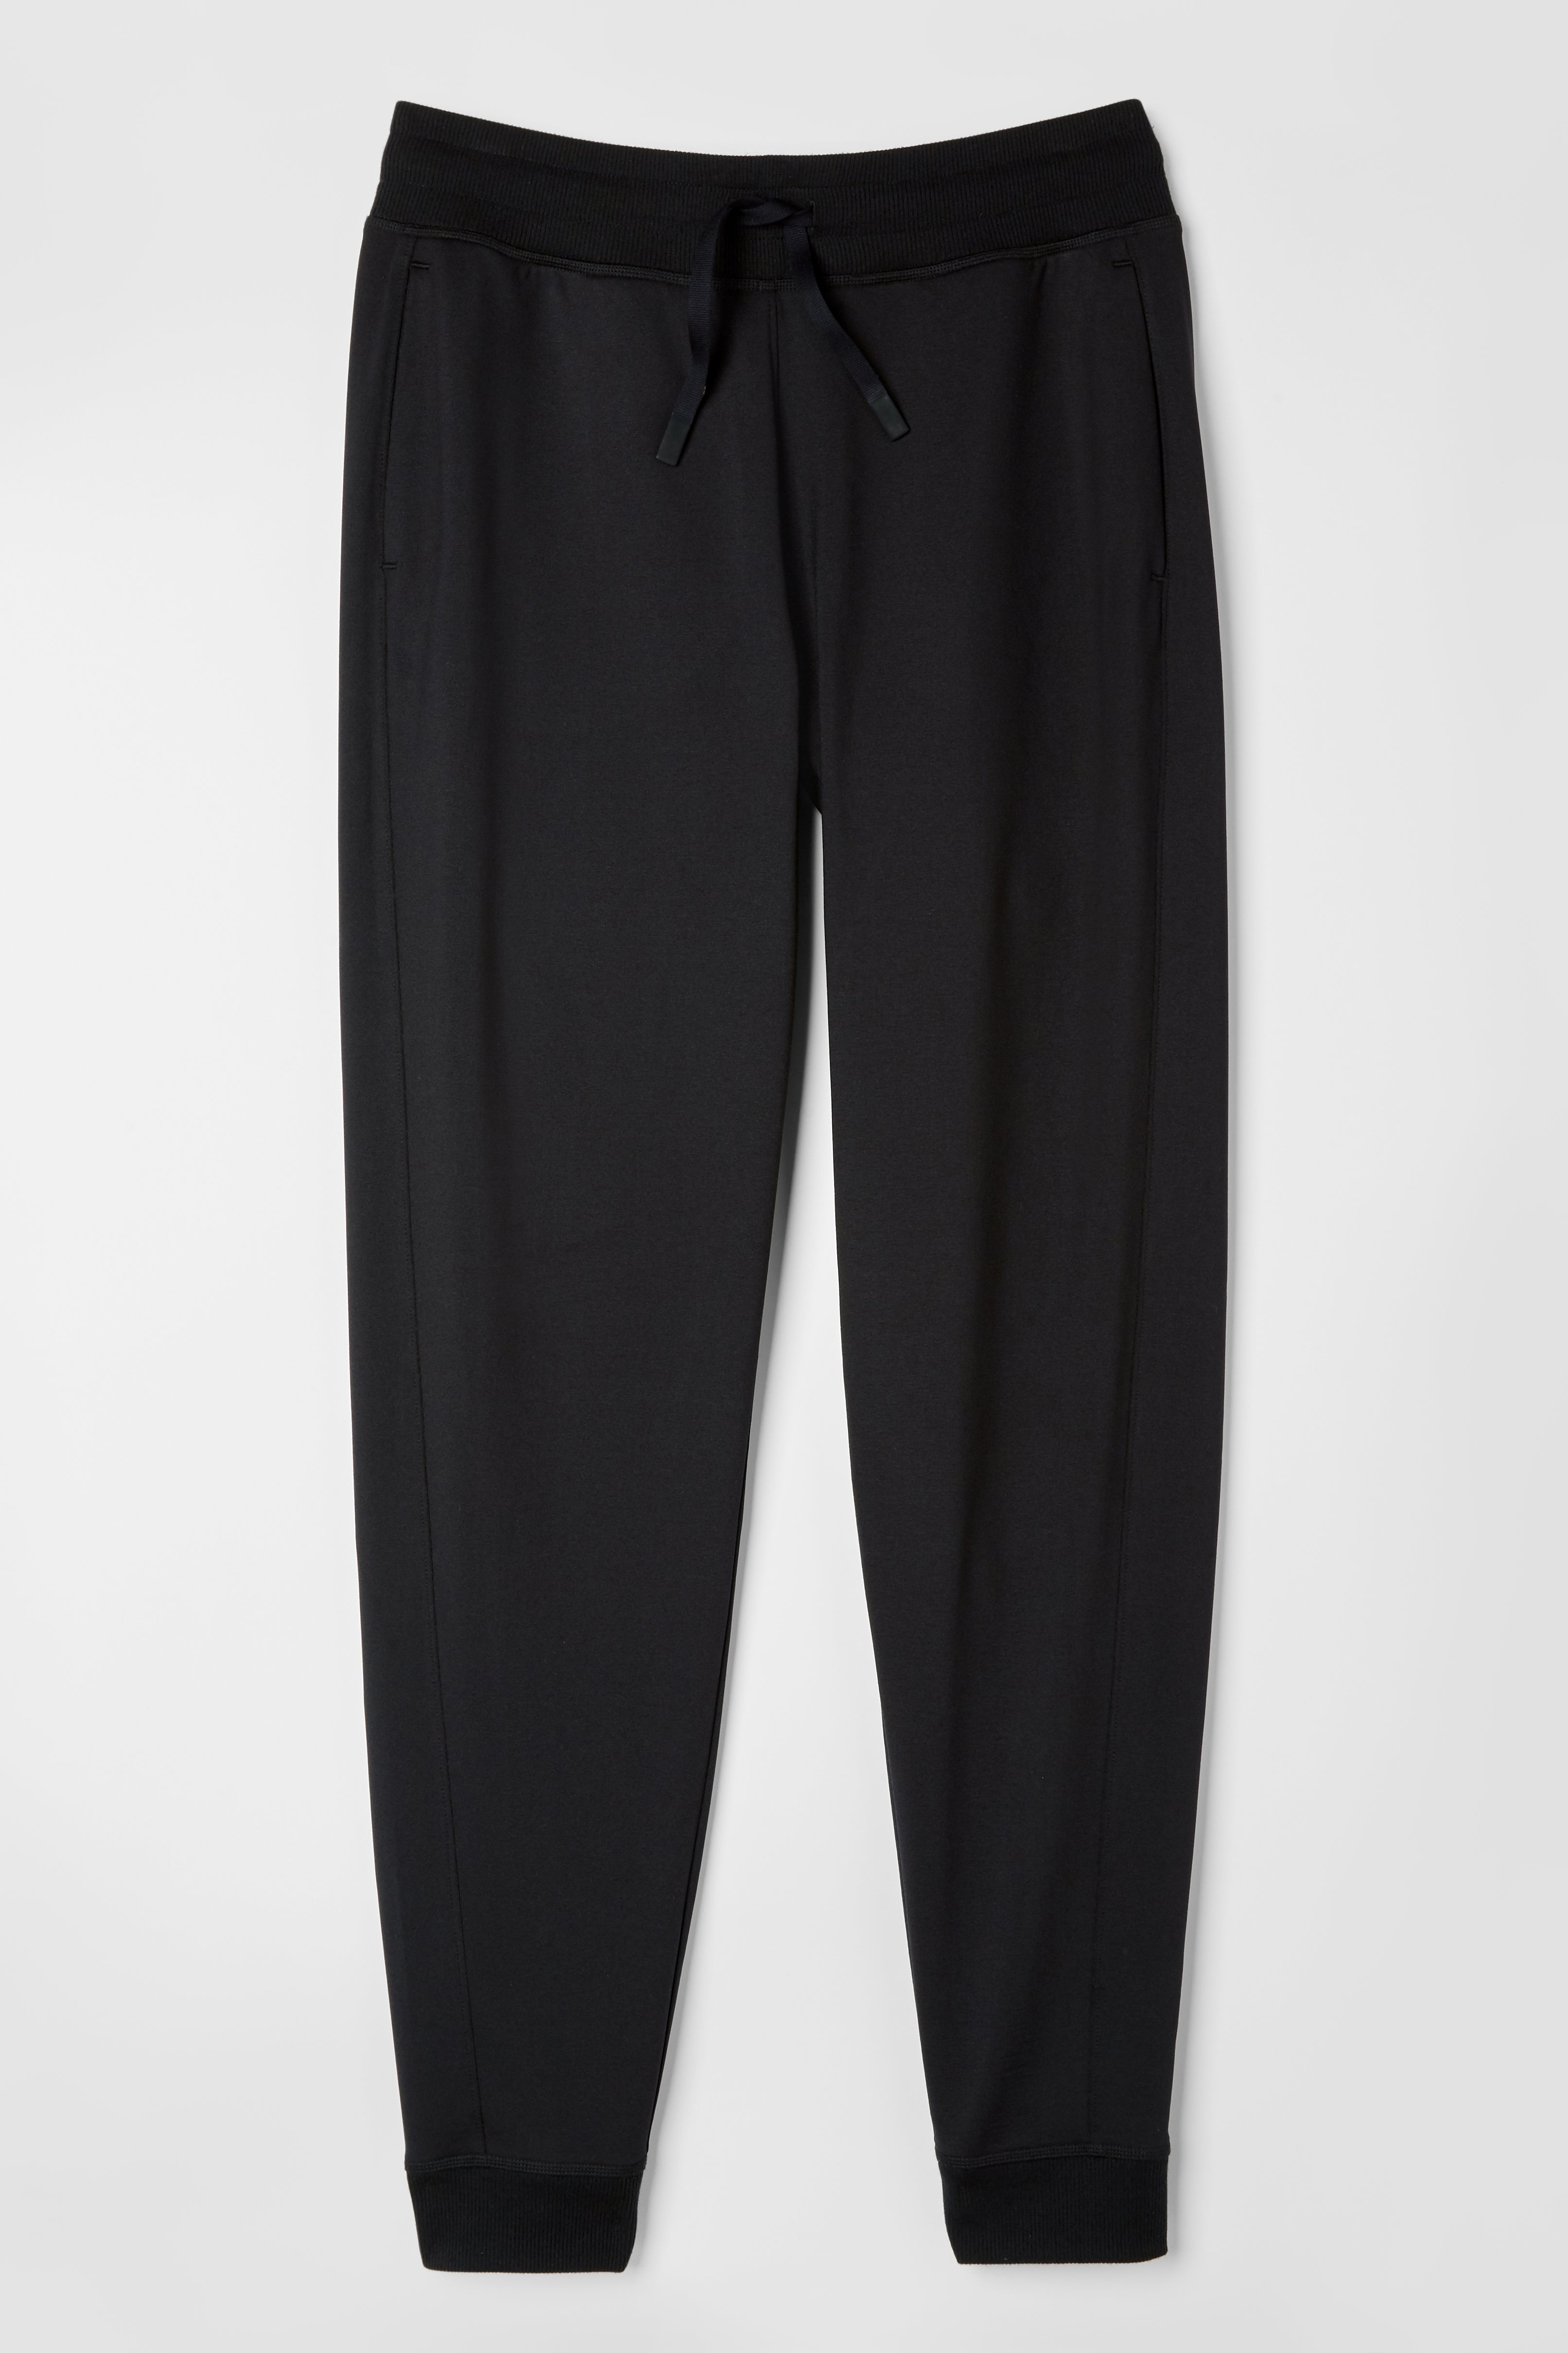 Buy the NWT Womens Drawstring Waist Activewear Sweatpants Size Small